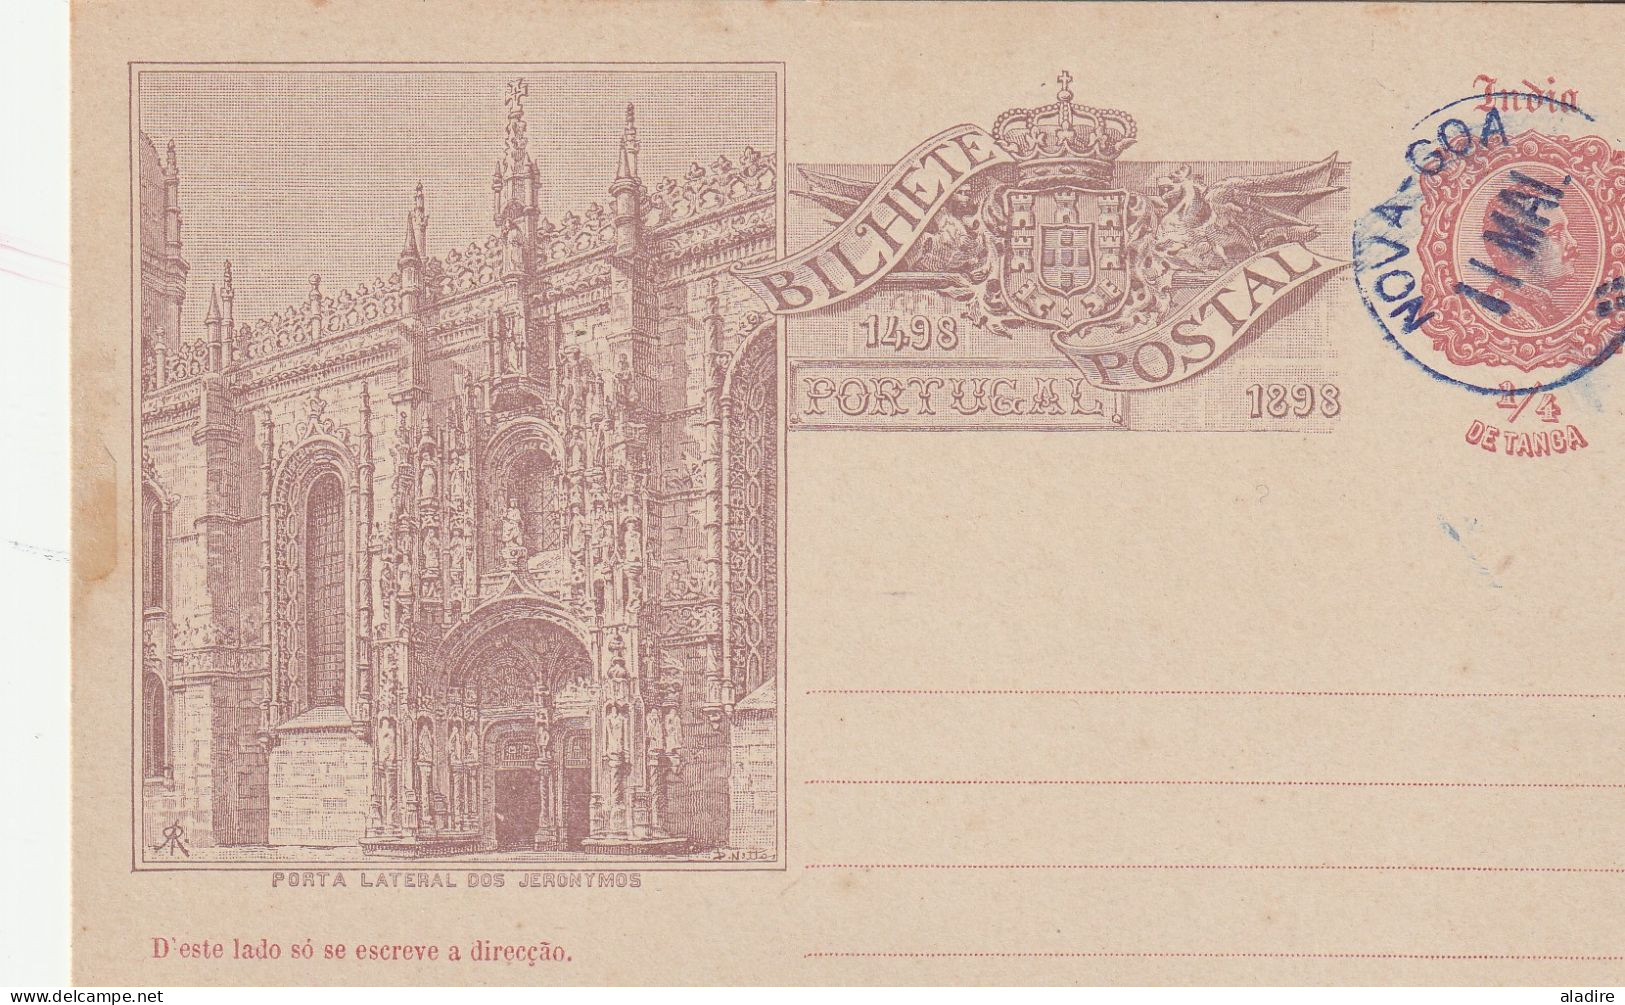 PORTUGAL - Collection of 13 old letters, covers &  card (1799 -1964) - 26 scans - € 49 euros